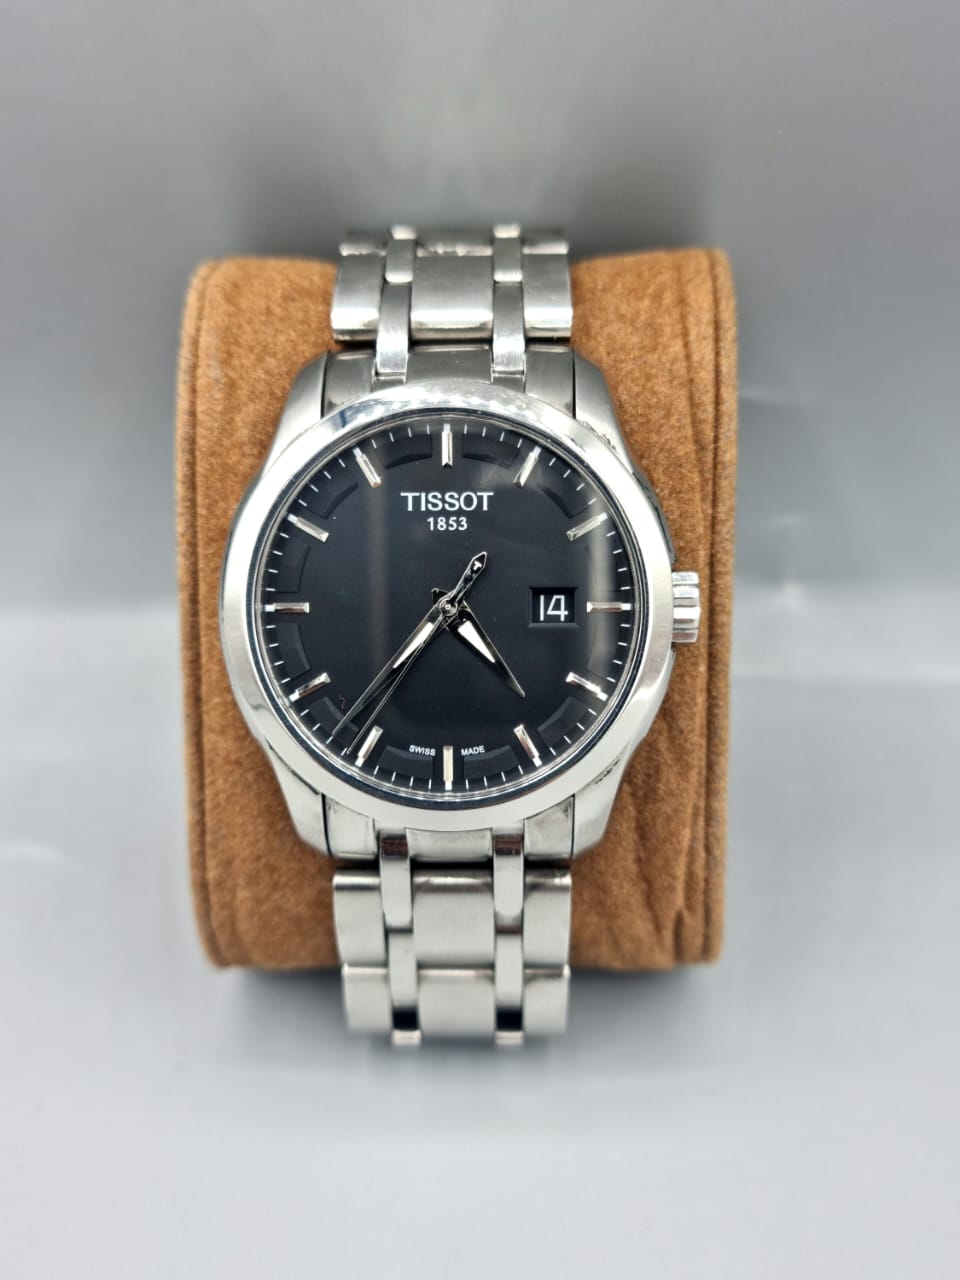 Tissot Swiss Made Gents Watch 42mm Dial Size